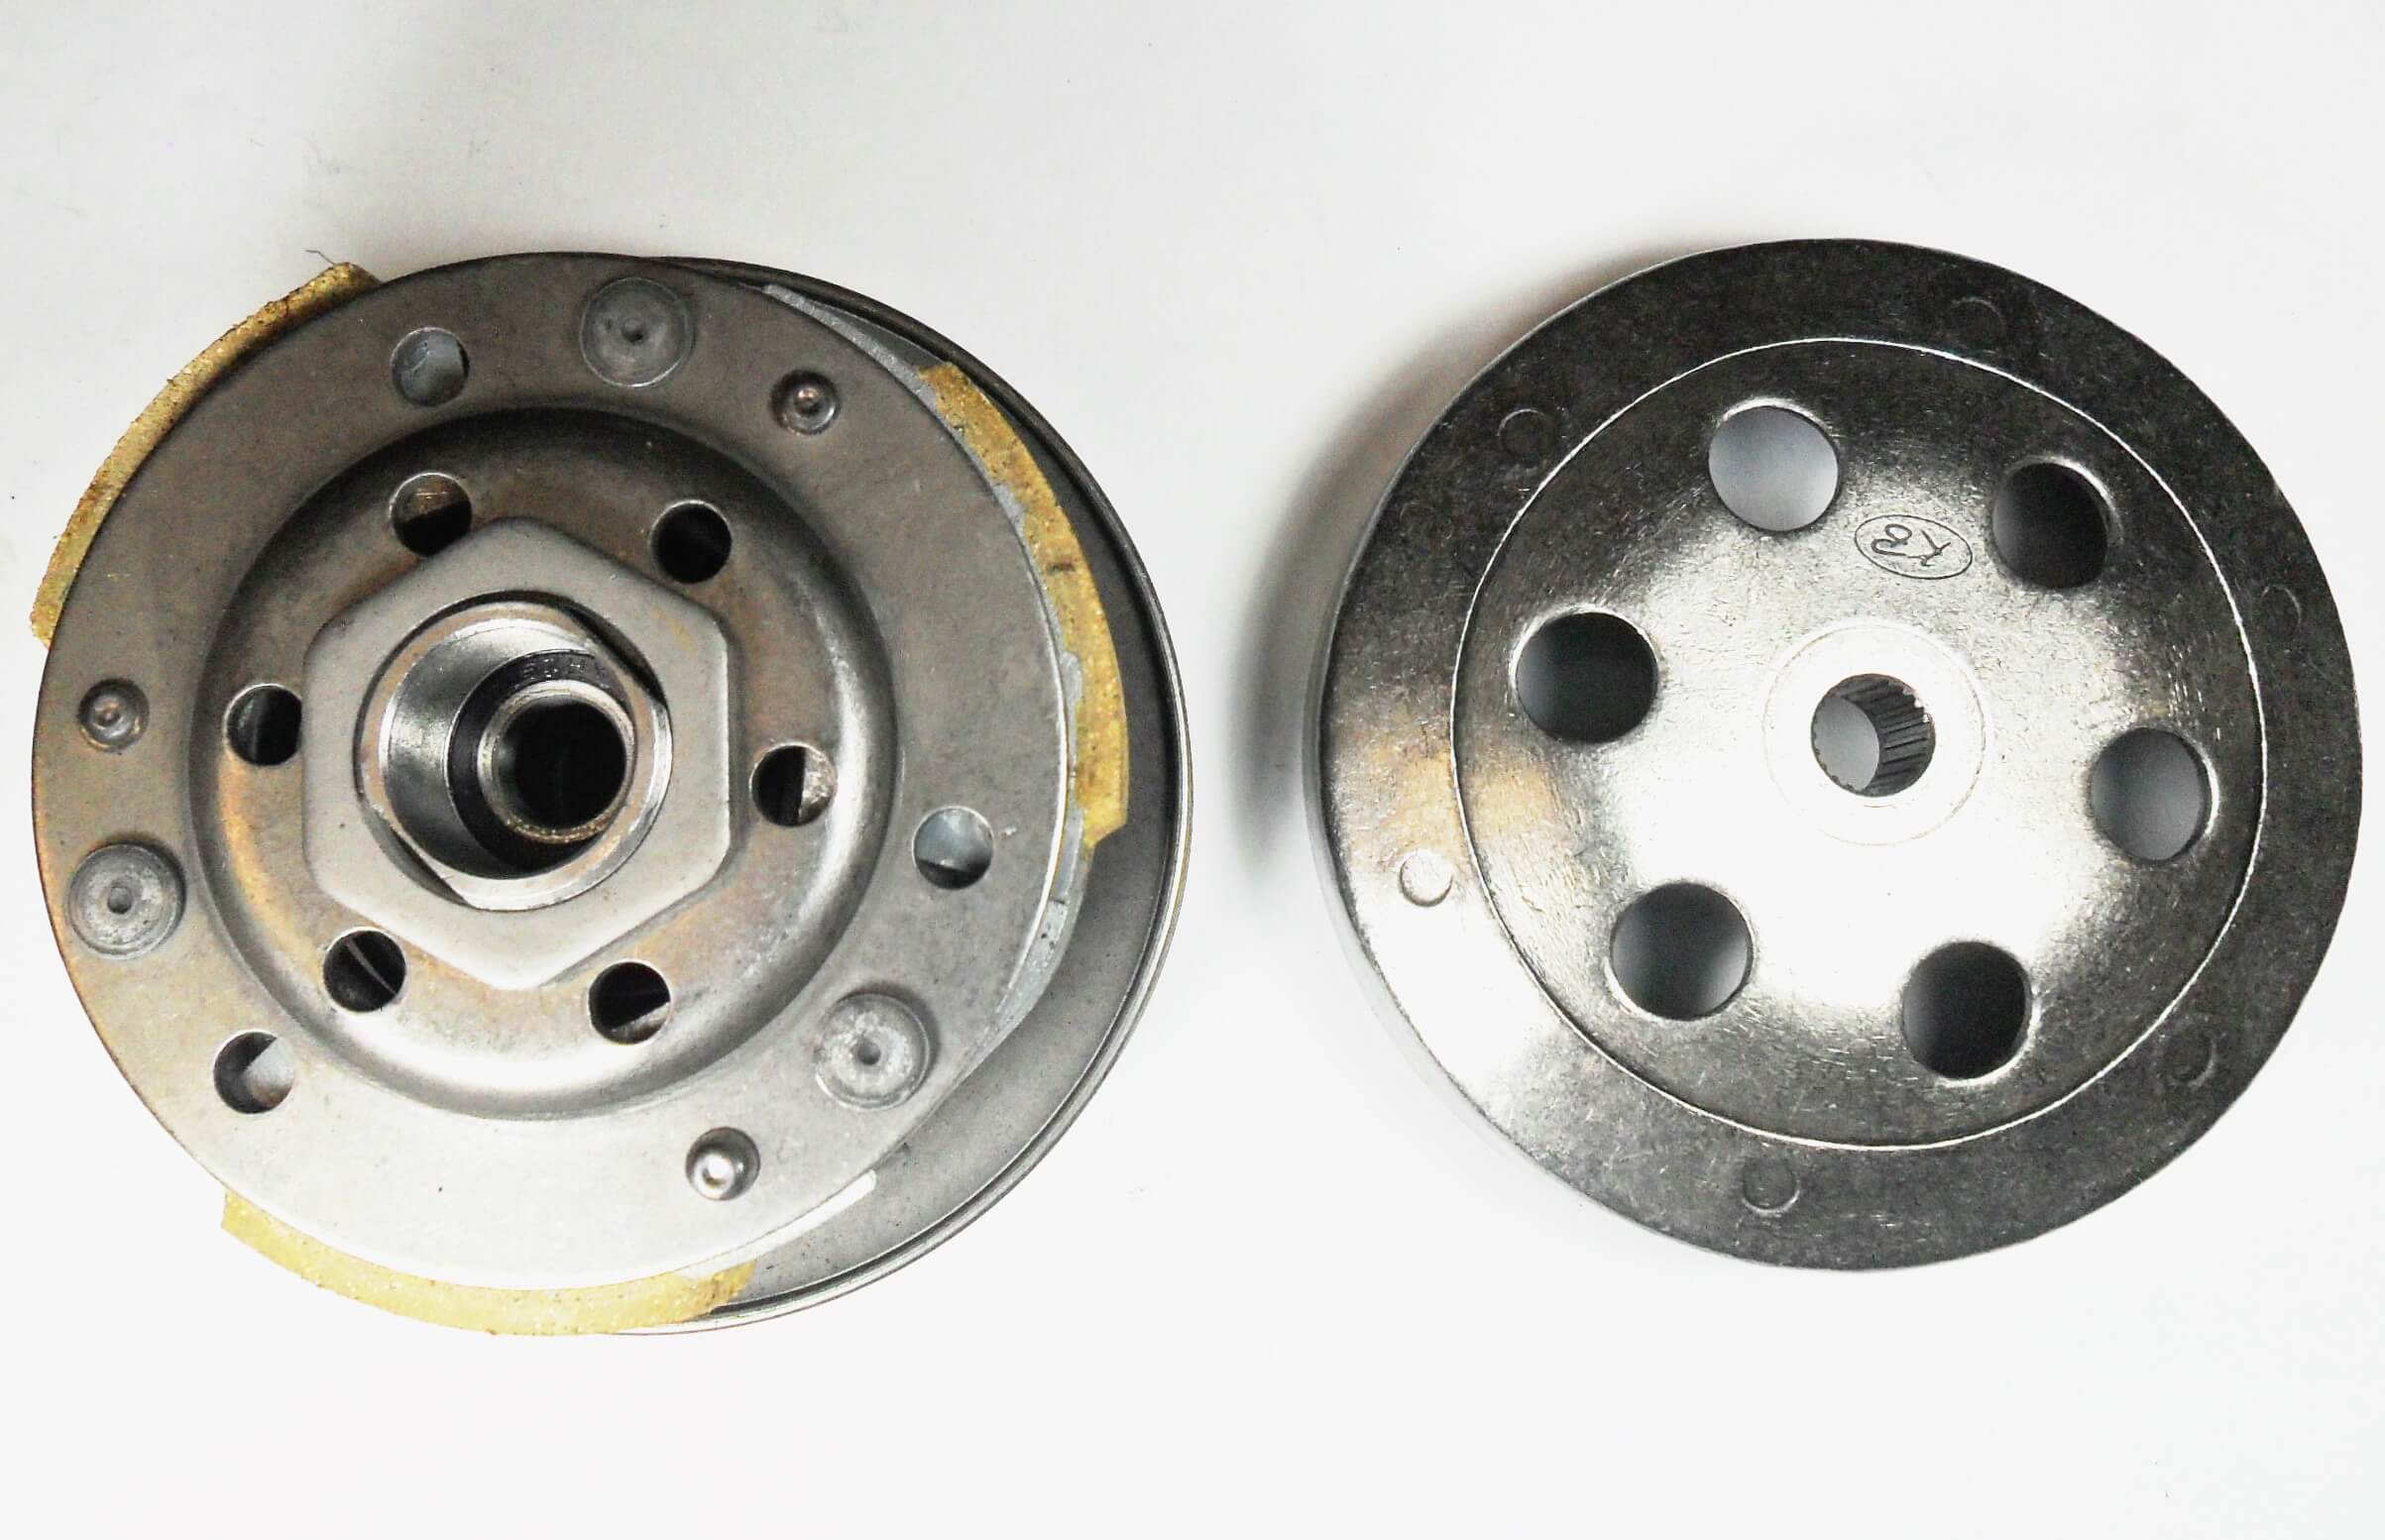 Rear Drive Clutch Pulley 2007-2013 Eton Viper RXL70, RX4-70, RXL90, RX4-90R, Rover UK1, Rover GT UK2, 2009-13 Yamaha Raptor 90 ATVs